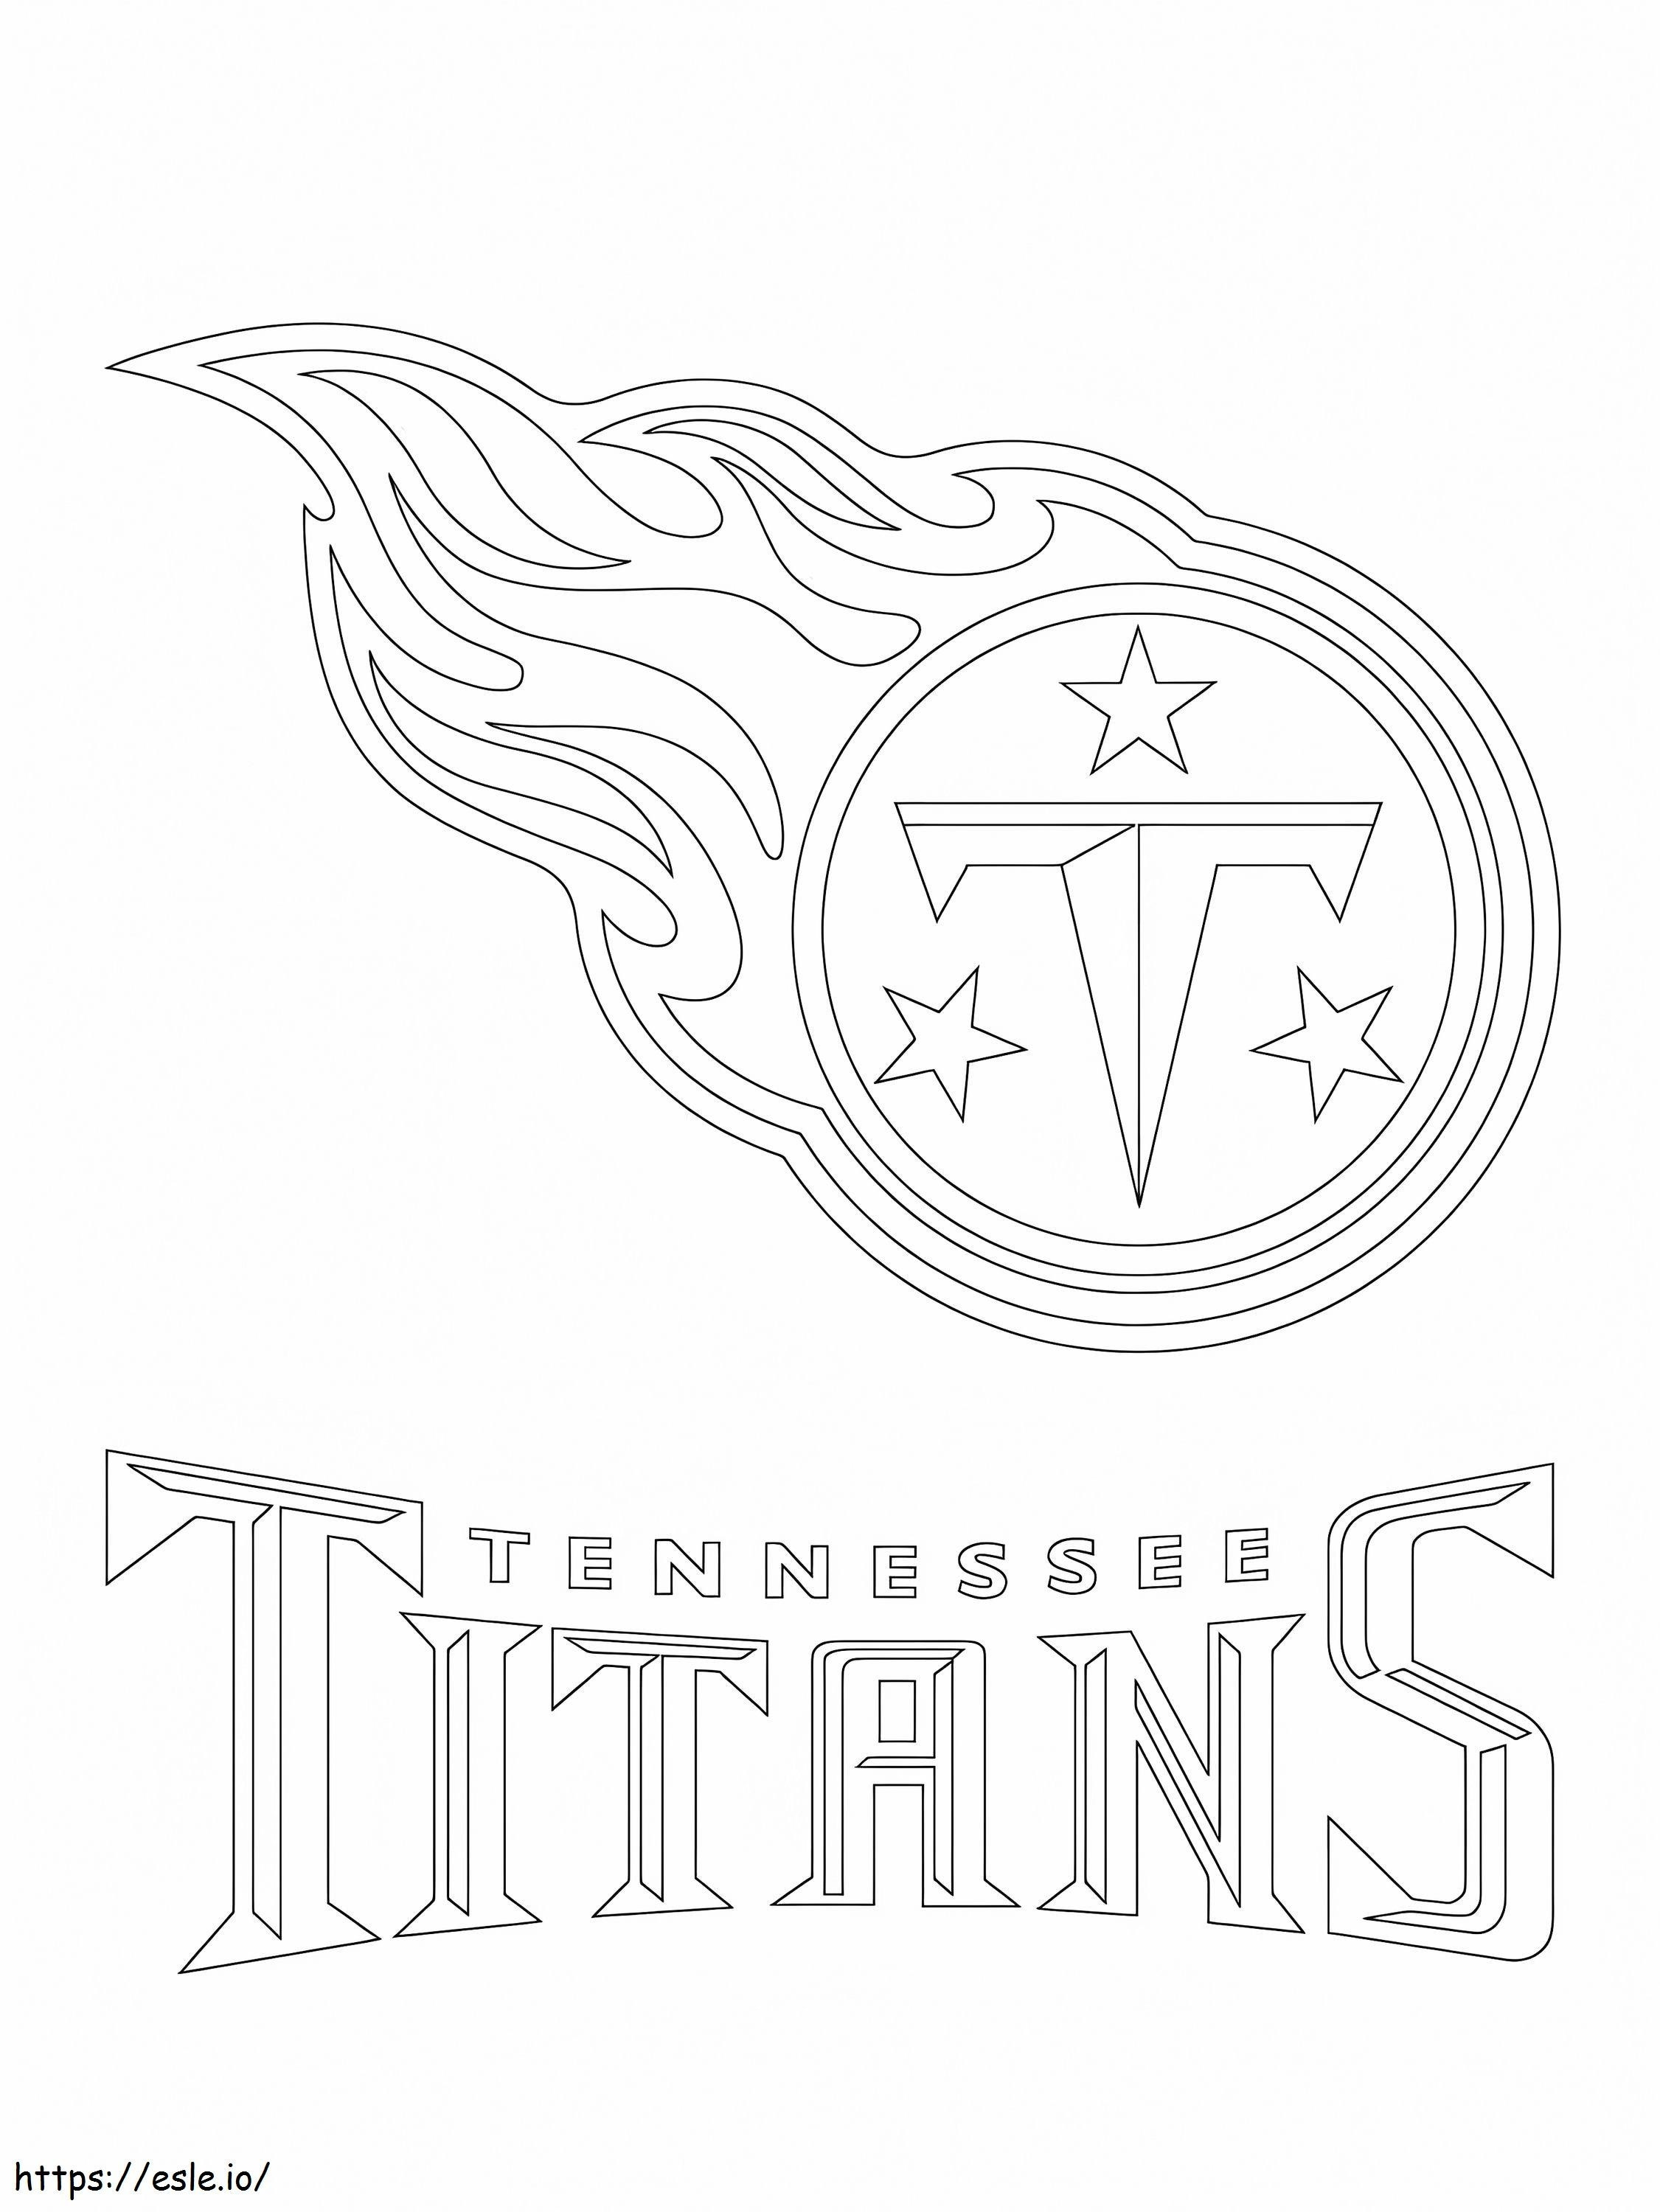 Tennessee Titans Logo coloring page